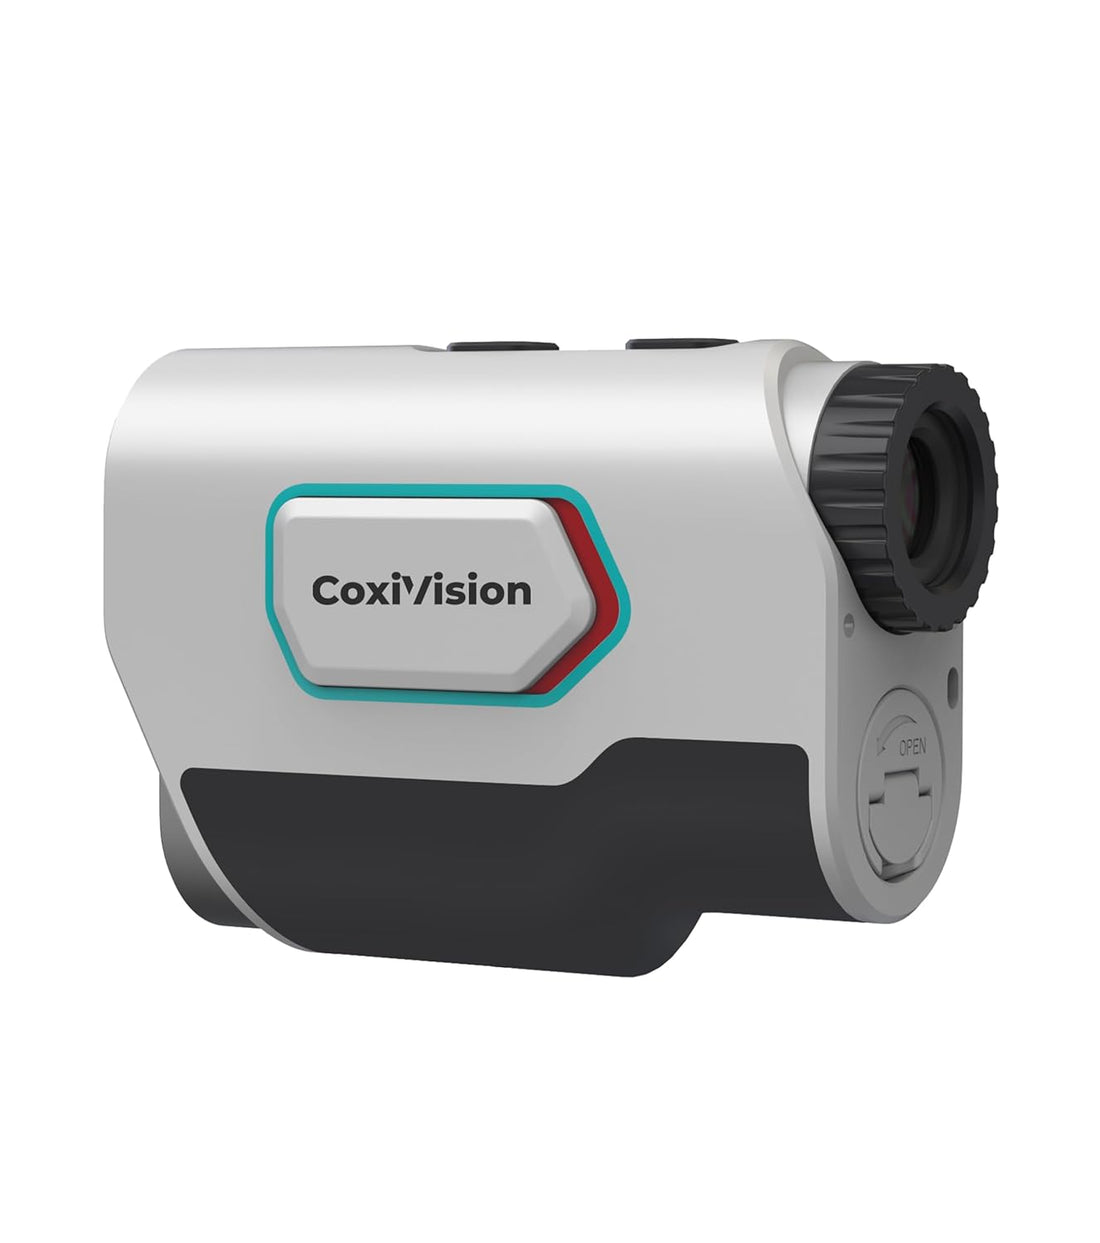 CoxiVision Rangefinder with Slope for Golf & Hunting, 1300-1500 Yards High-Precision Range Finder, 6X Magnification, Flagpole-Lock Vibration, Bow/Rifle Mode, Slope Measurement